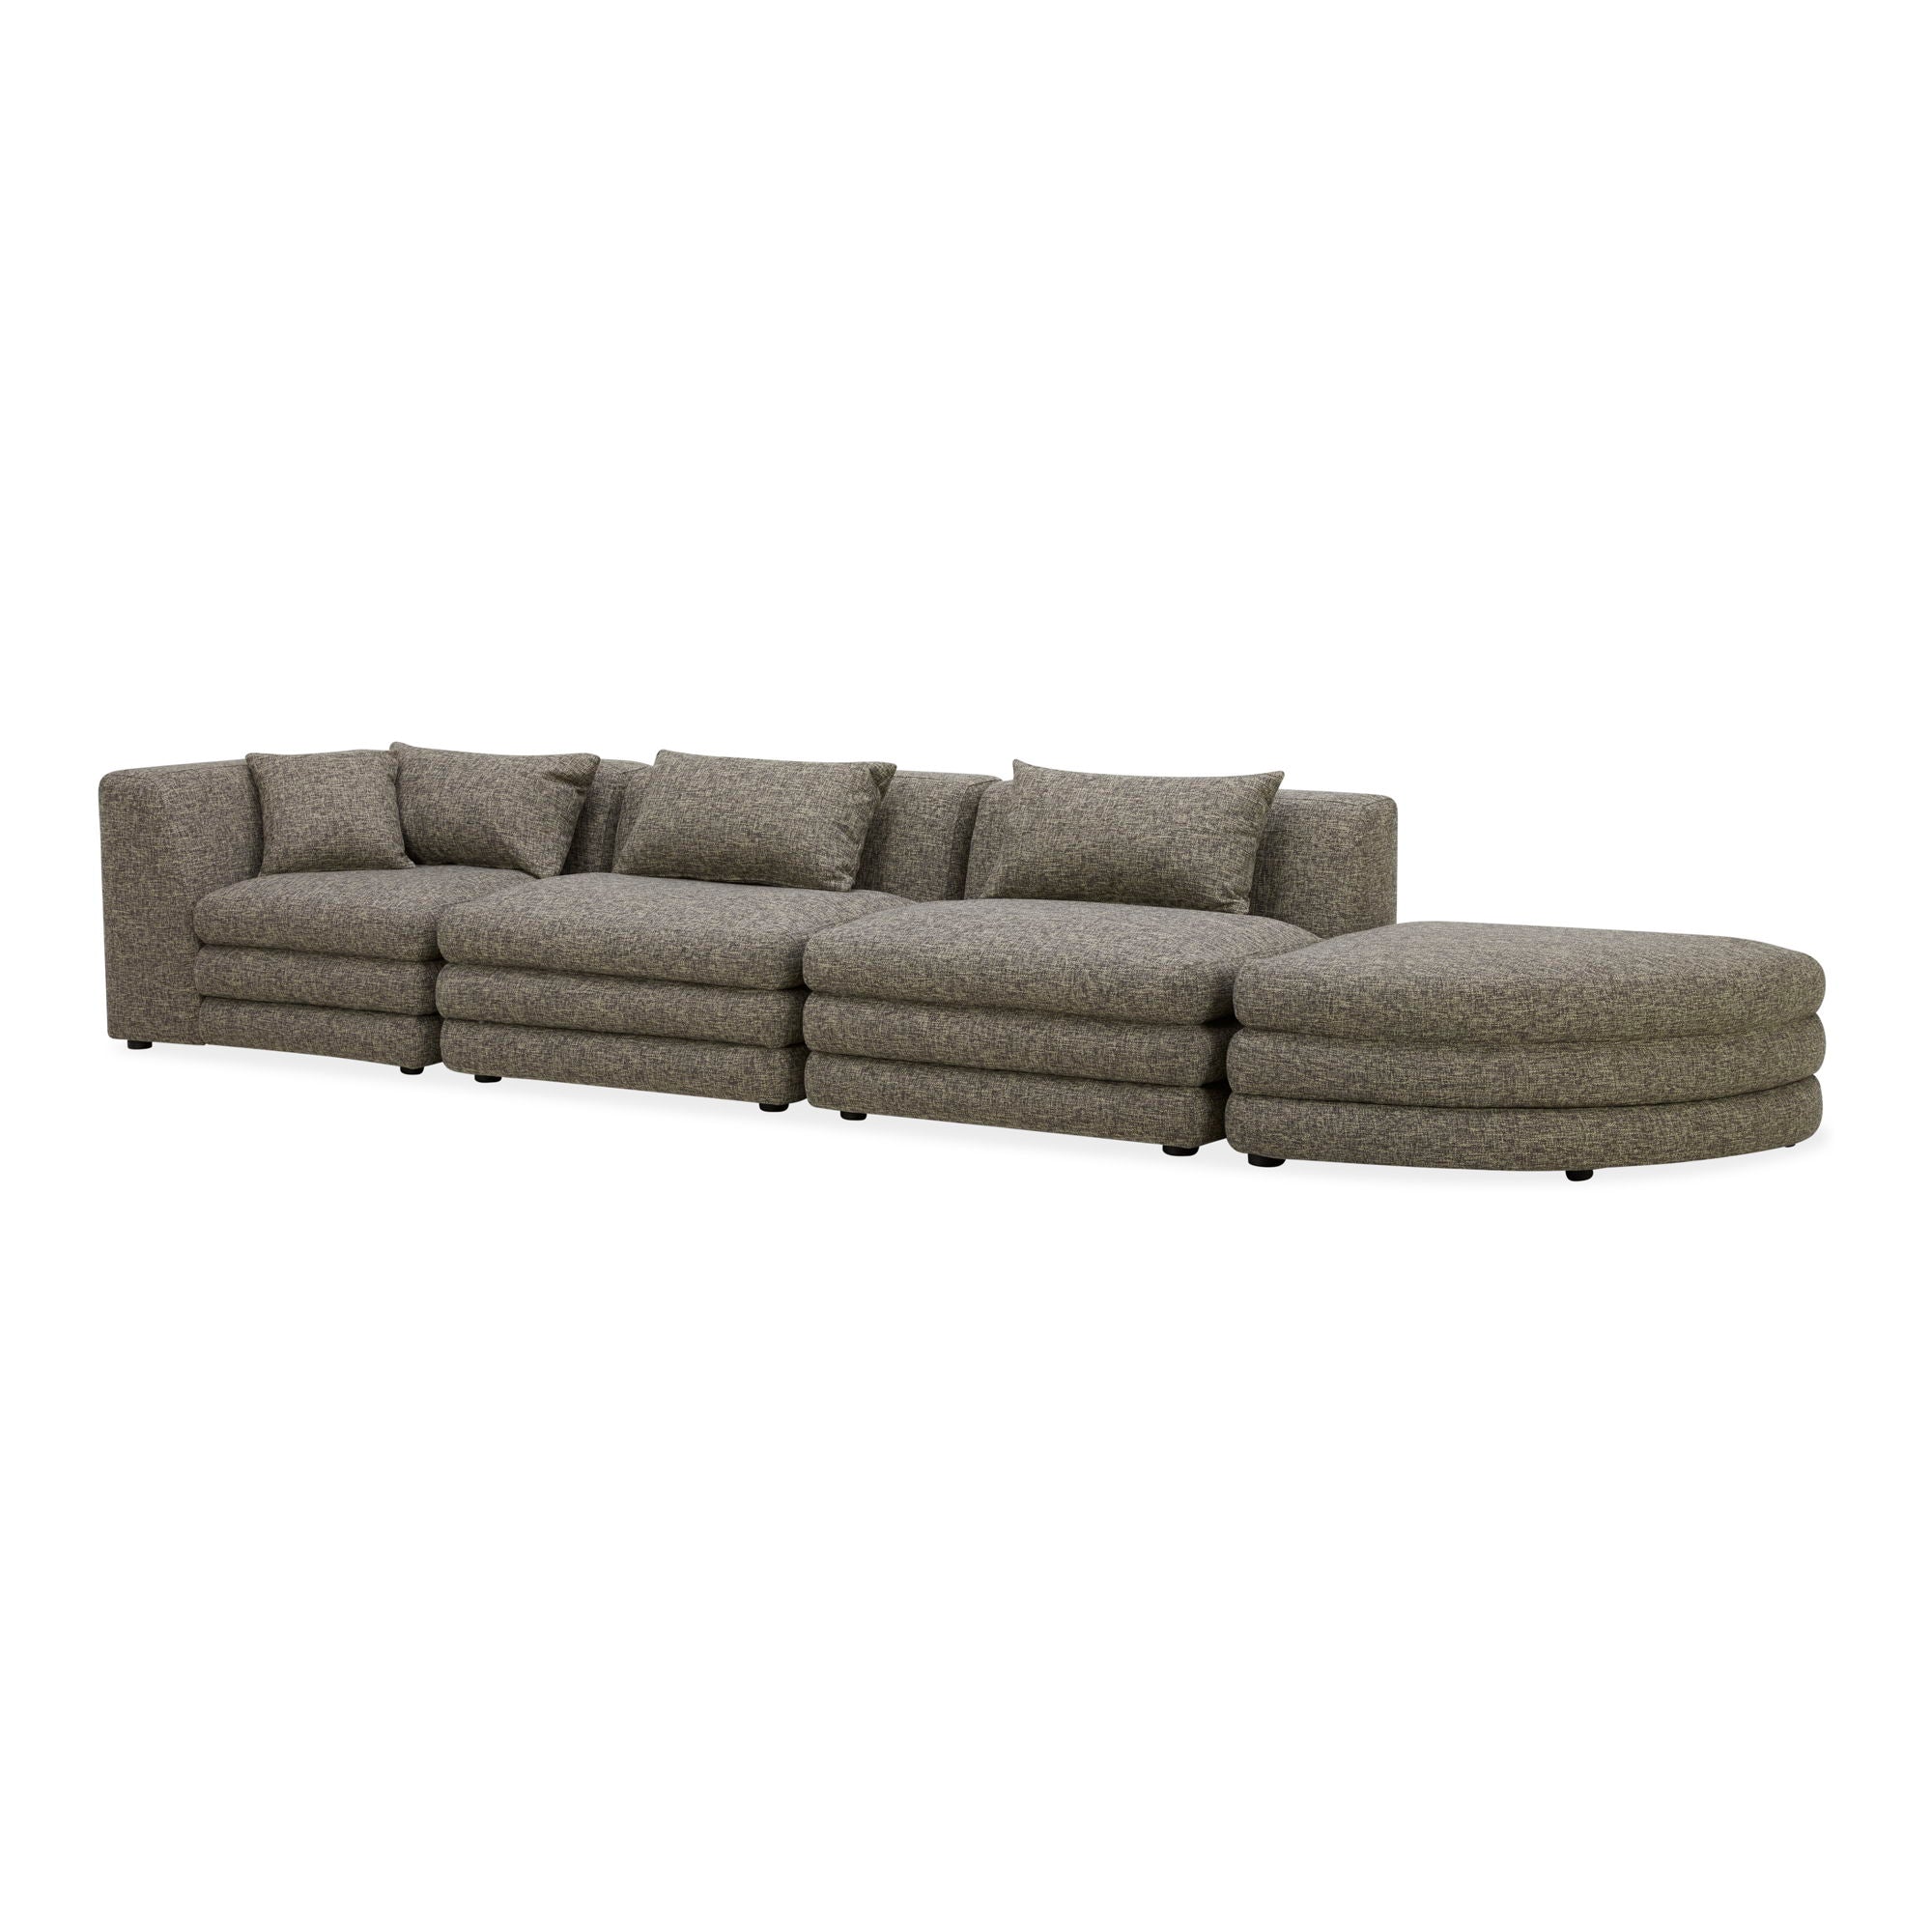 Lowtide - Linear Modular Sectional - Surie Shadow-Stationary Sectionals-American Furniture Outlet